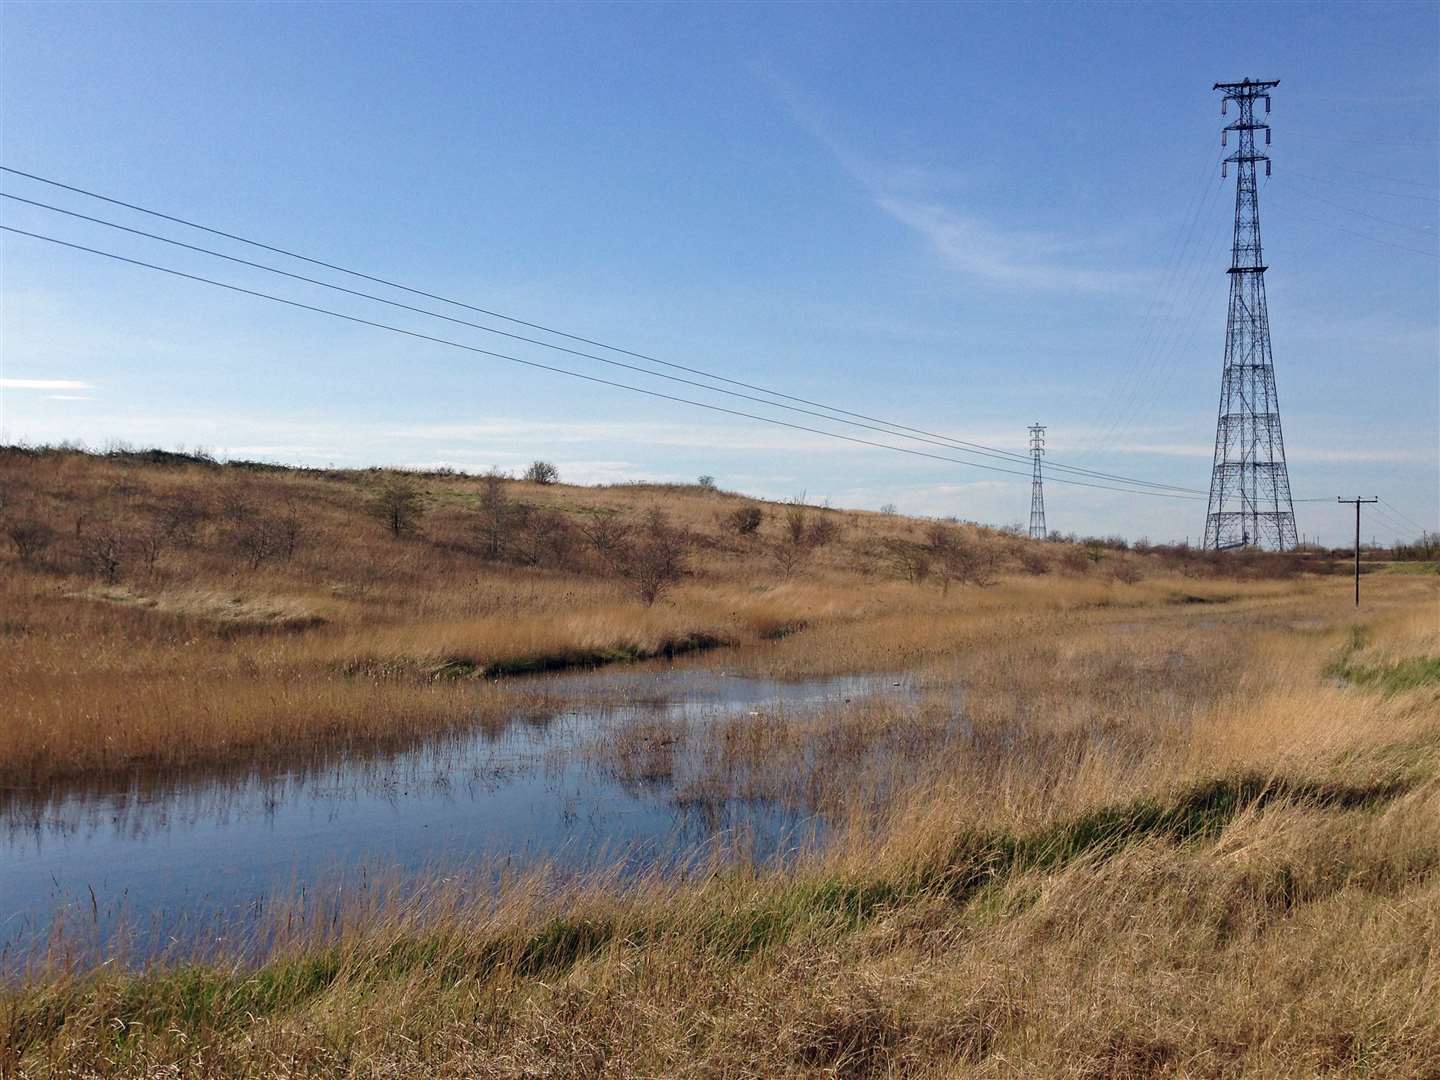 The Swanscombe Marshes are subject to a bid from conservation groups urging to protect the land from development by the London Resort theme park. Picture: Diamond Geezer